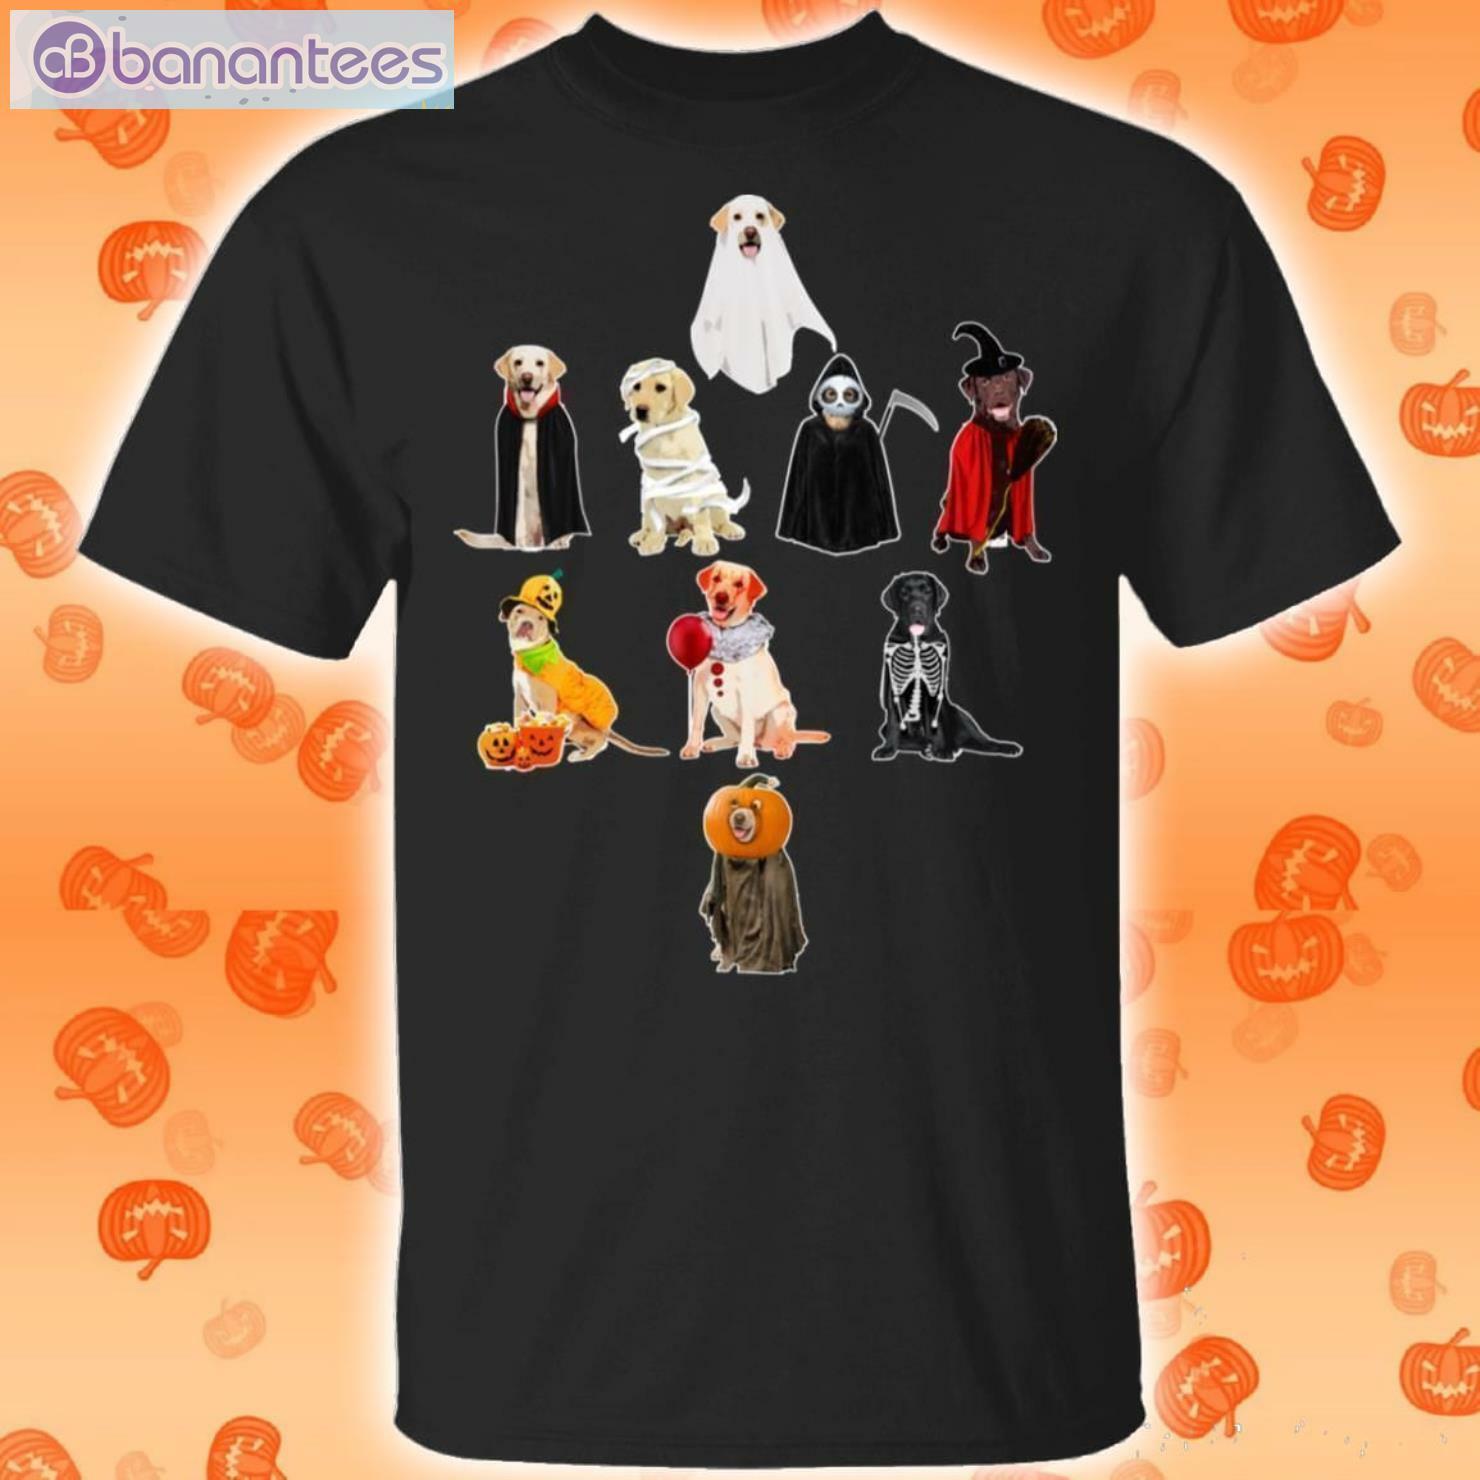 Labrador Retrievers In Halloweens Funny T-Shirt Product Photo 1 Product photo 1